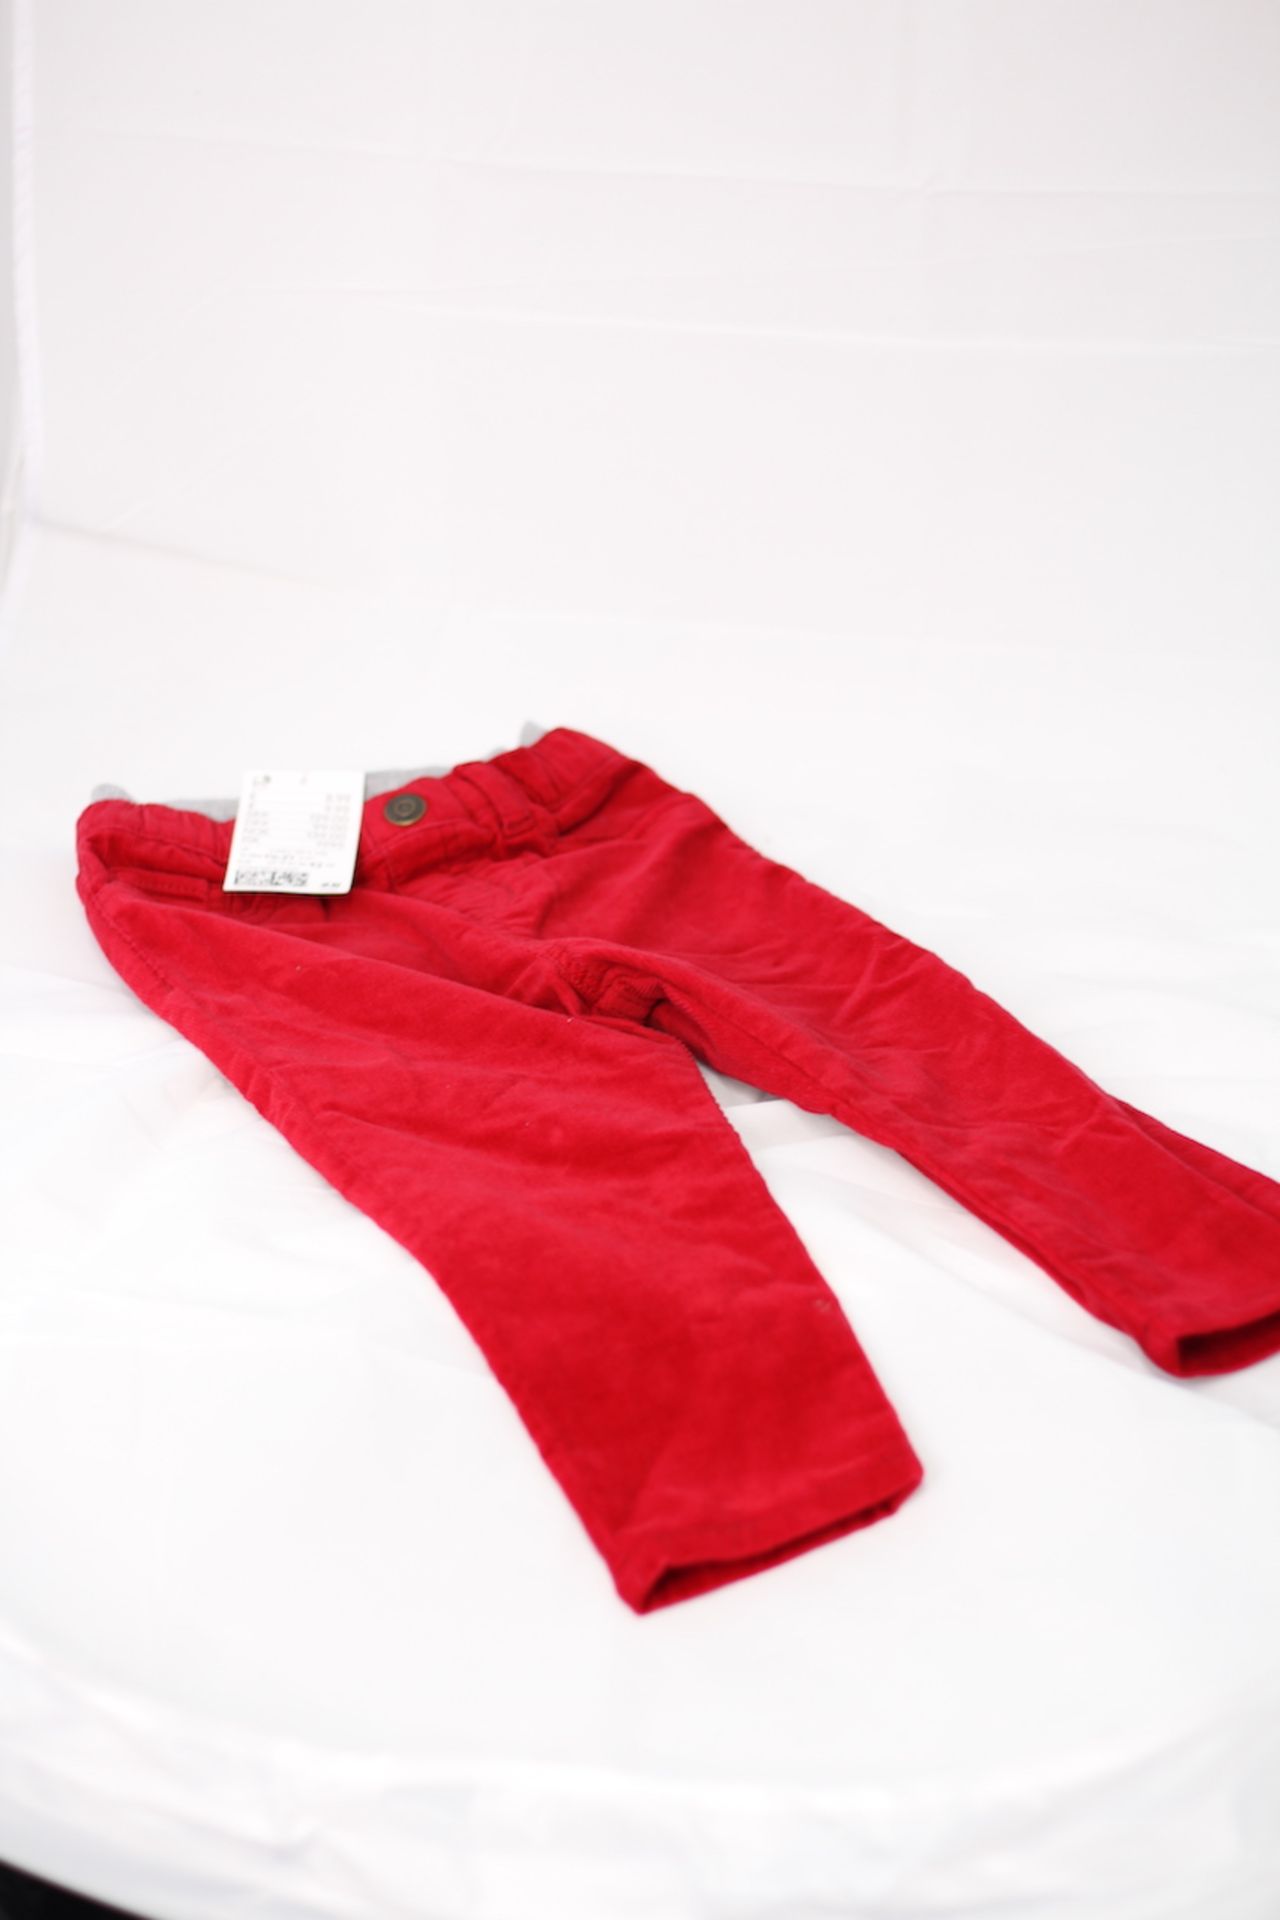 H&M BABY TROUSERS NEW WITH LABELS, Colour : RED, AGE: 1-2YRS, SIZE: UNKNOWN, CONDITION GRADE: 1 VERY